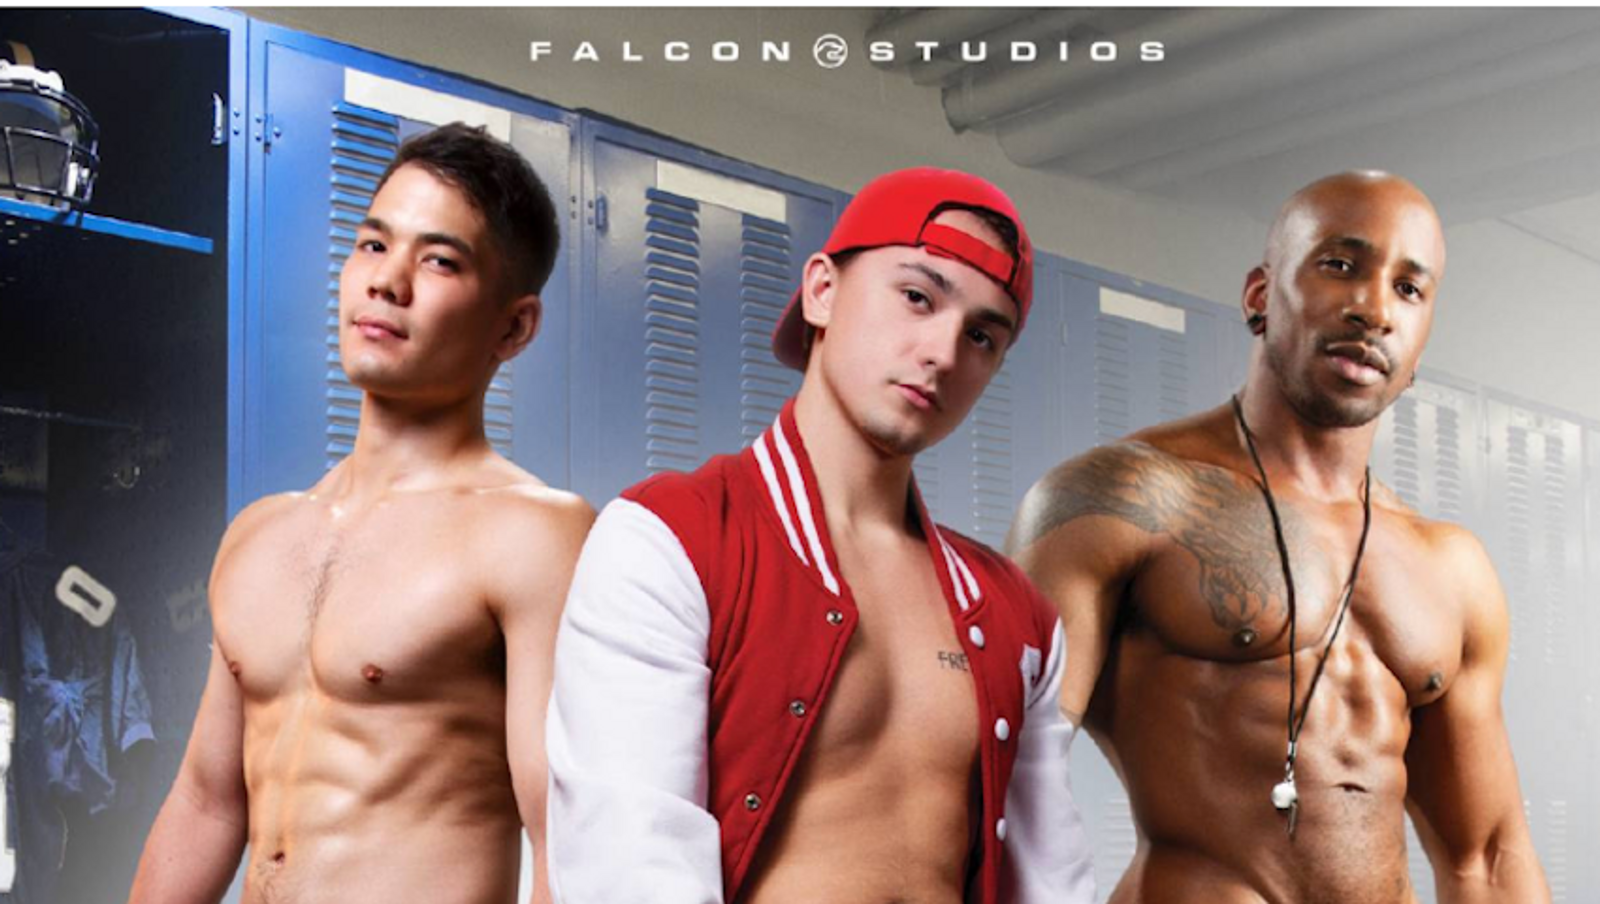 Falcon Scores With Release of 'Tales From the Locker Room 2'